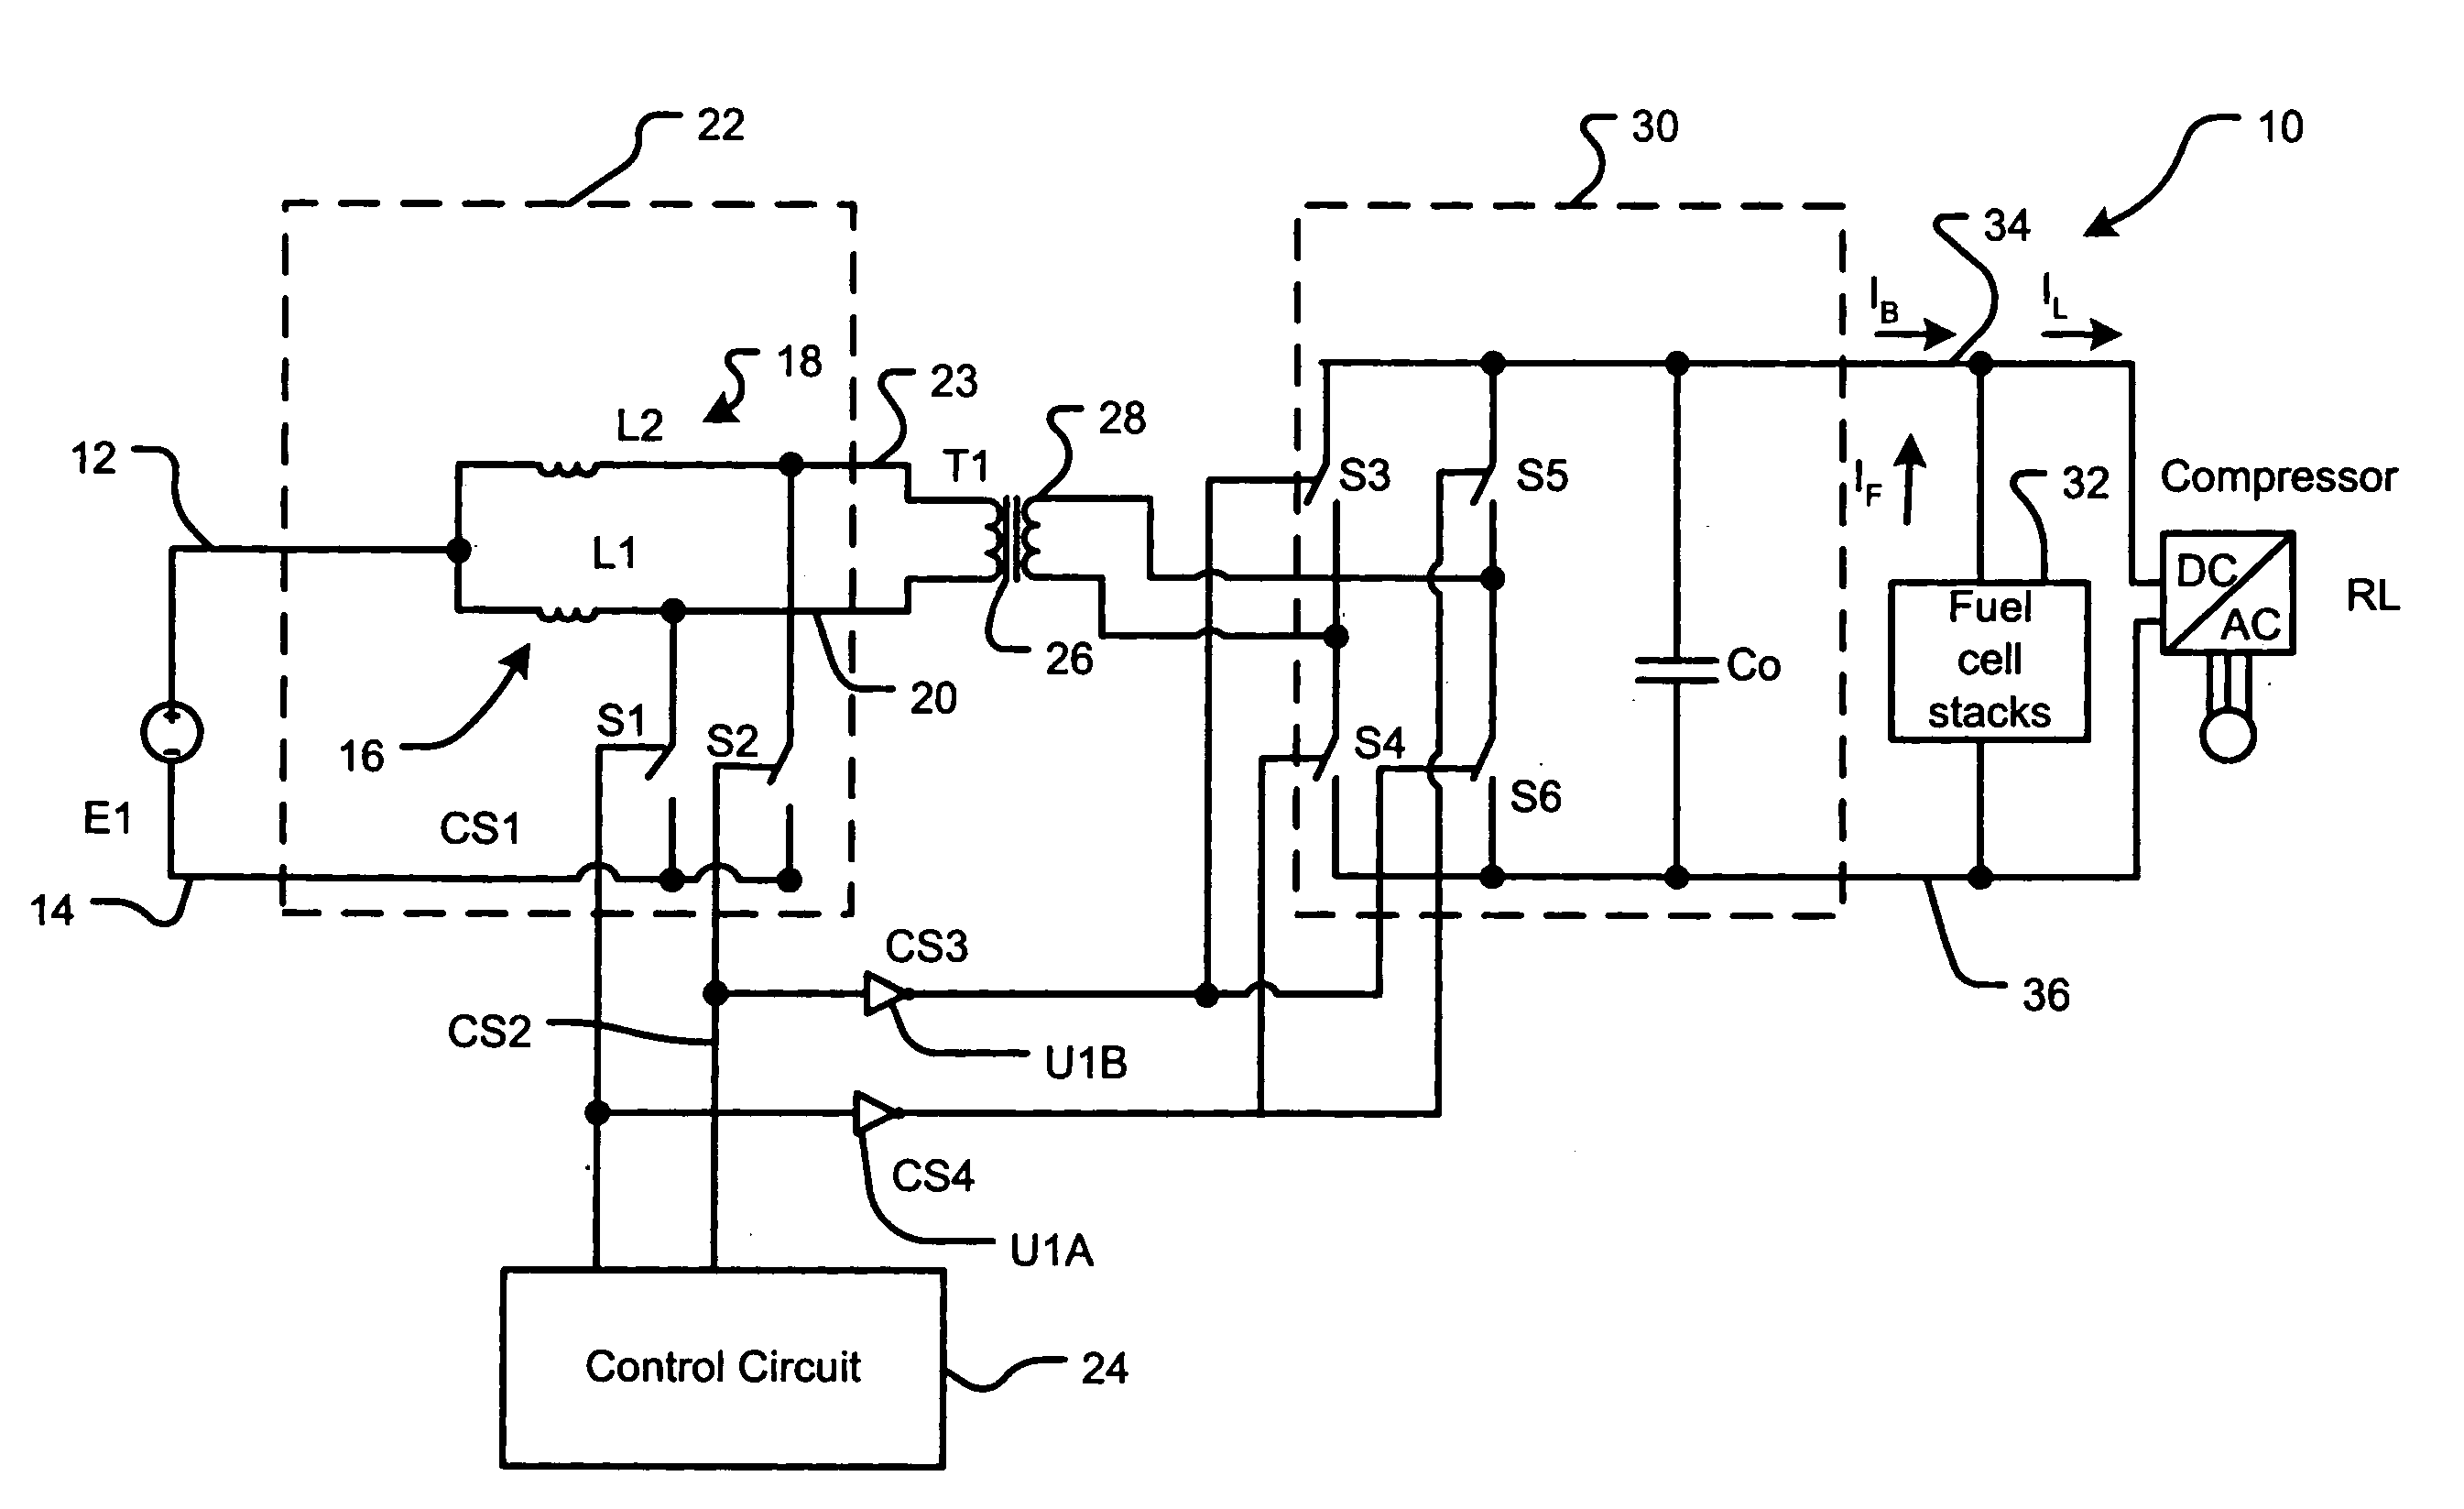 Stable power conversion circuits